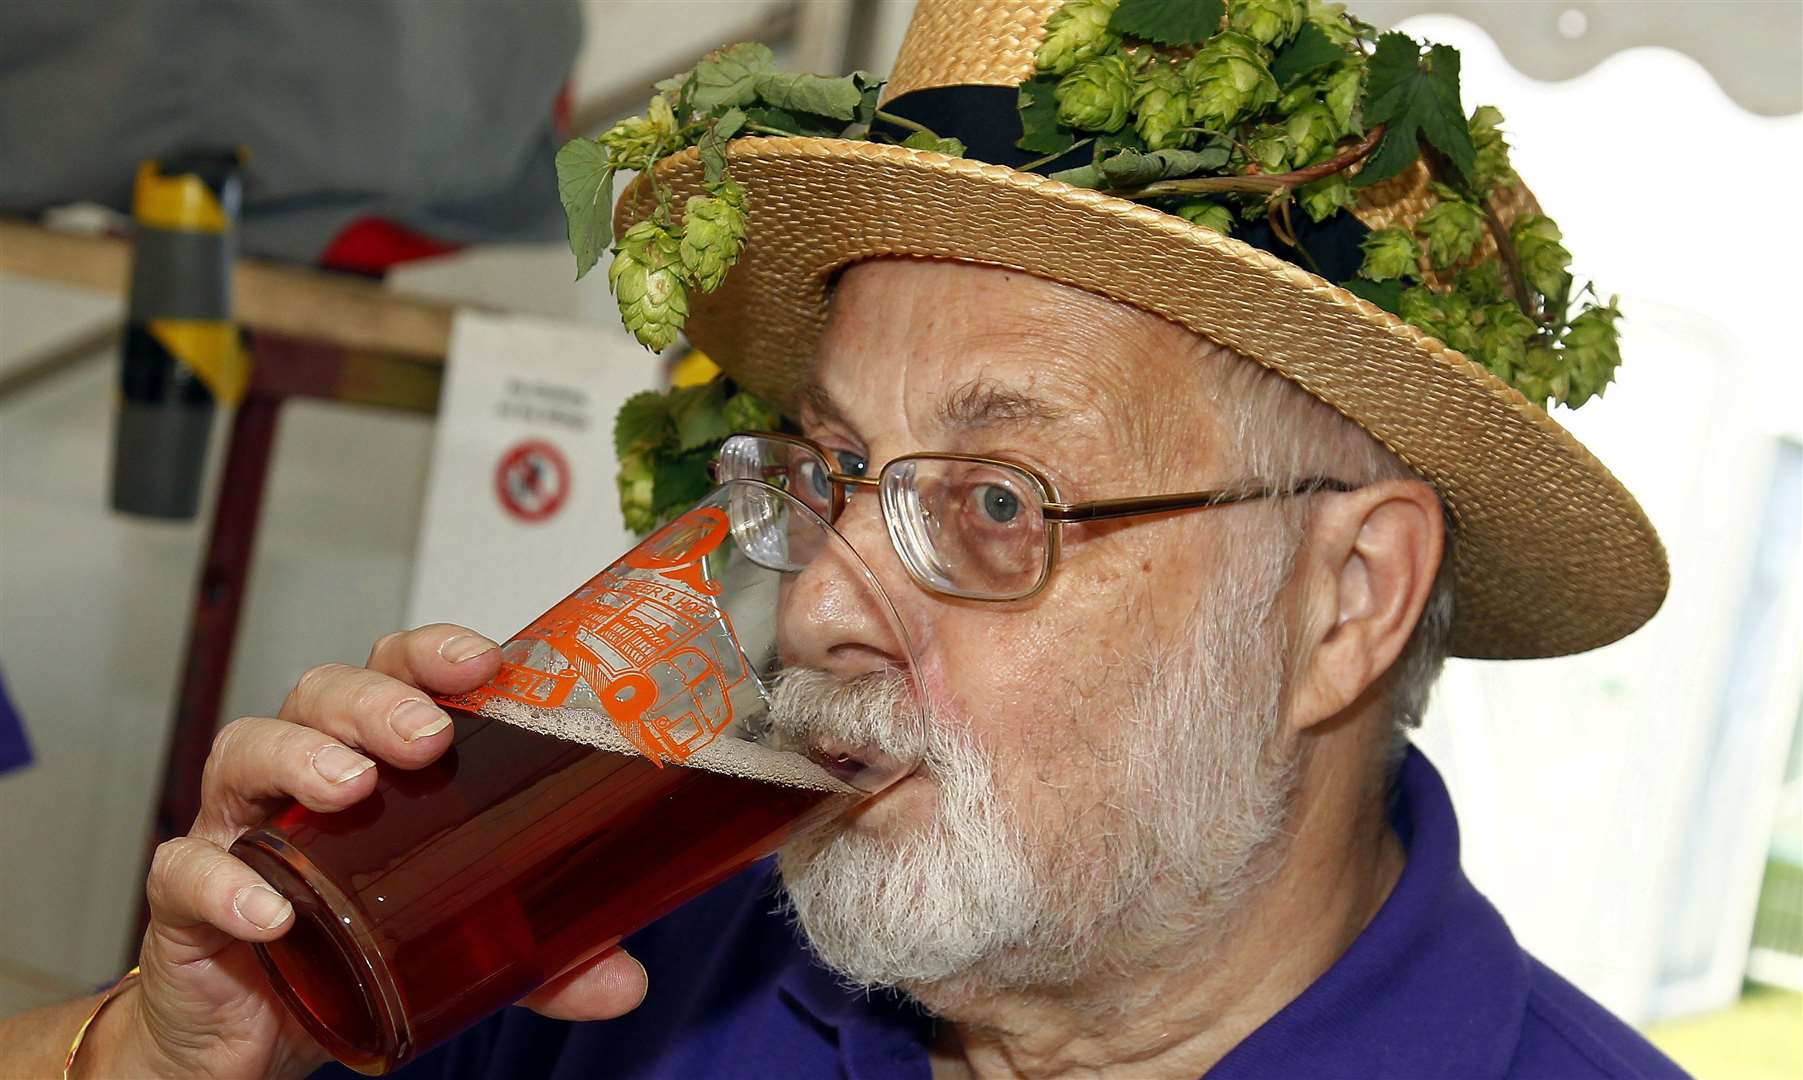 The festival will offer more than 70 ales and 30 ciders. Picture: Sean Aidan